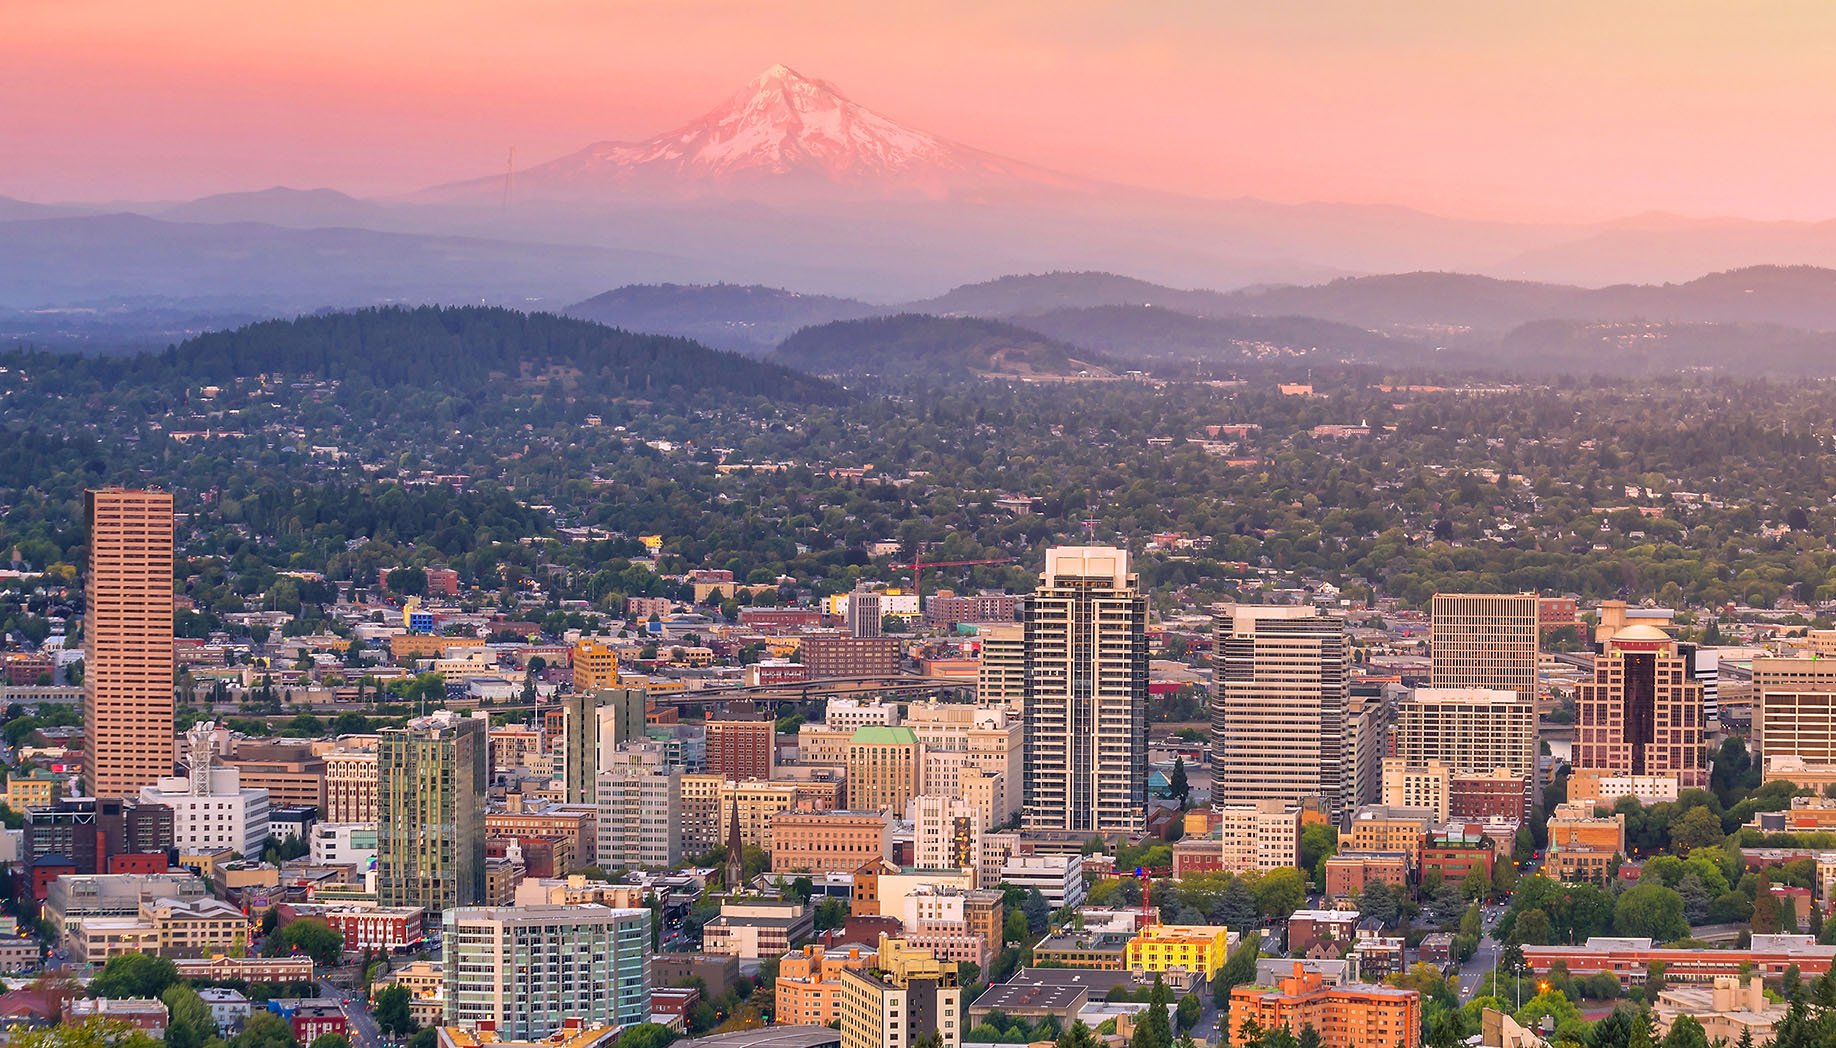 How to Find and Land Amazing Jobs in Portland